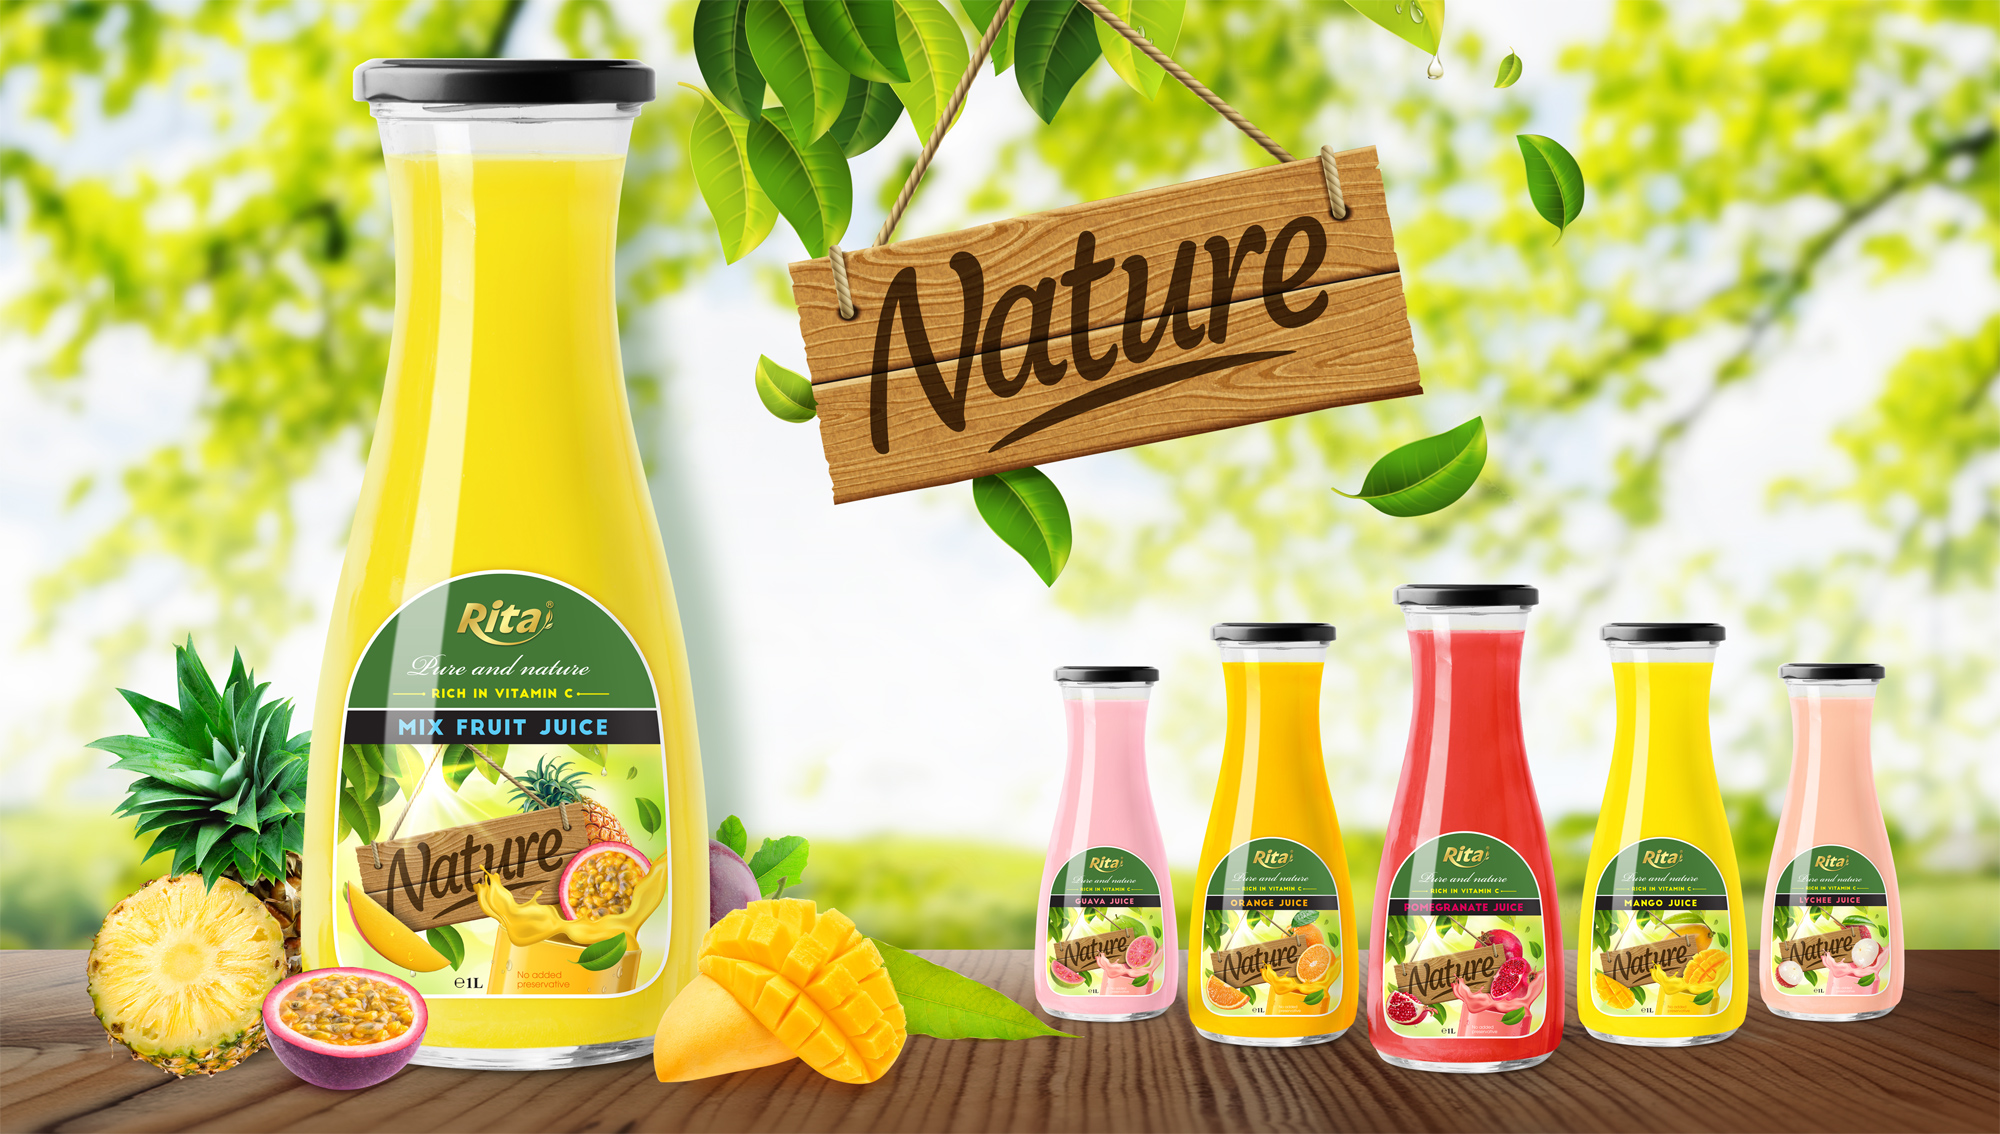 fruits and their vitamins in Mix Fruit juice 1L Glass bottle